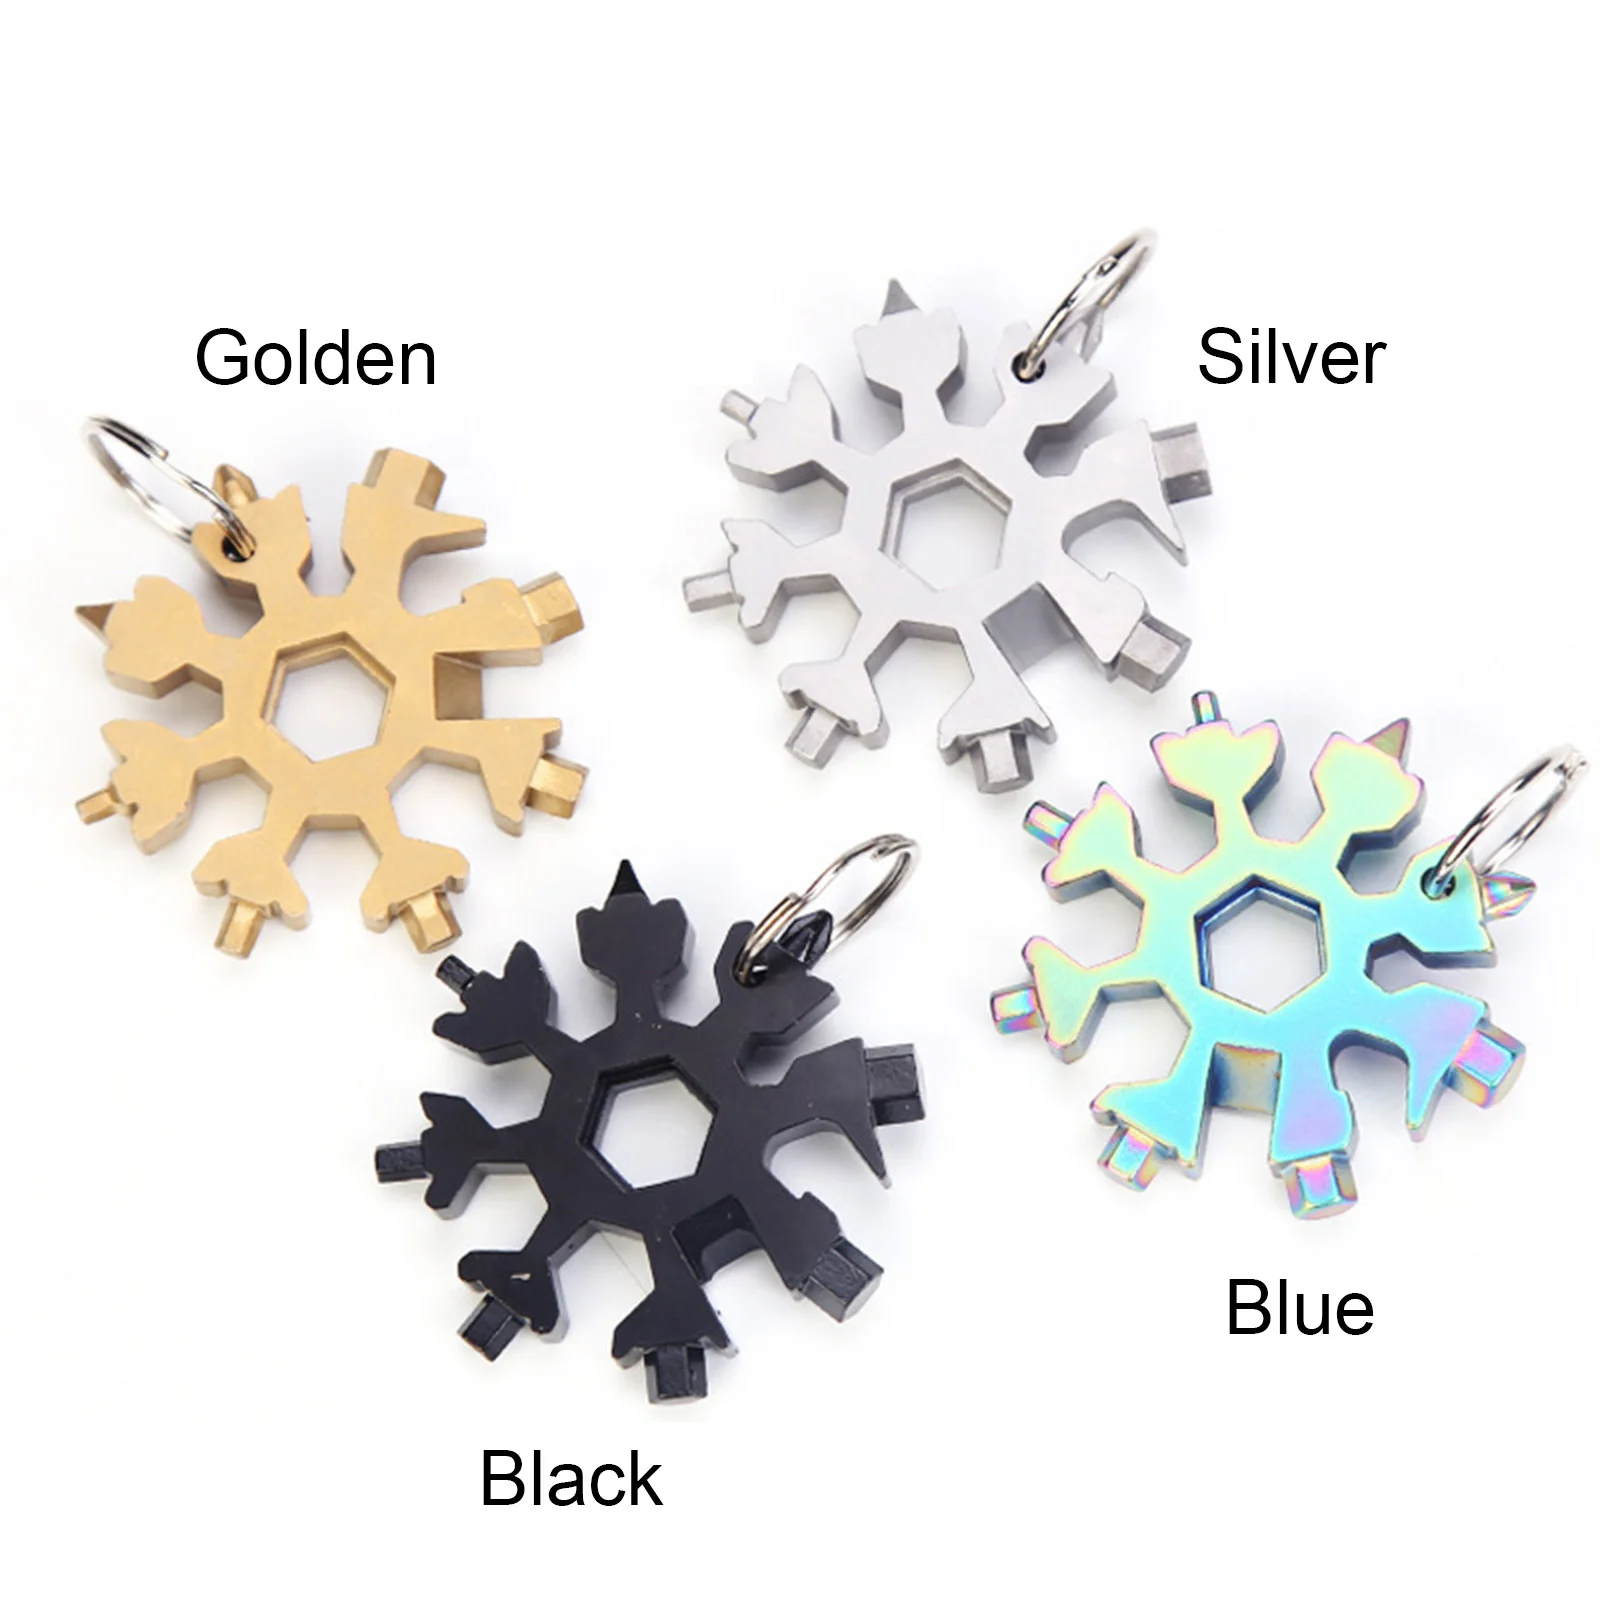 

18 in 1 Snowflake Spanner Keyring Hex Multifunction Outdoor Hiking Wrench Key Ring Pocket Multipurpose Camp Survive Hand Tools